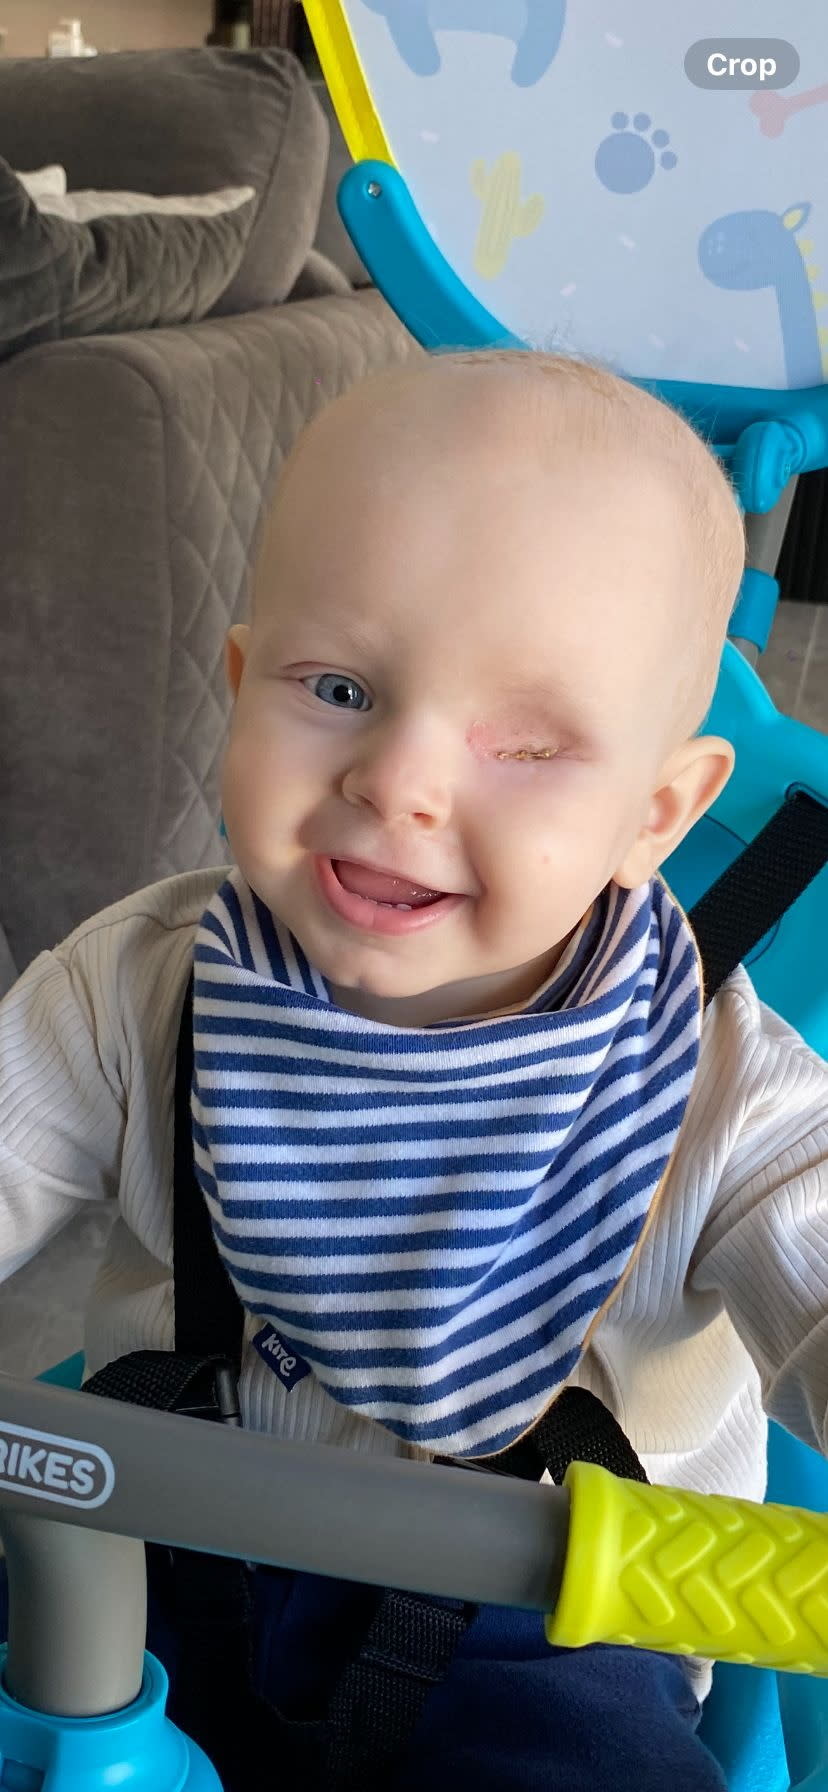 His parents say their son has remained smiling throughout his cancer journey. (Becky Flower/SWNS)